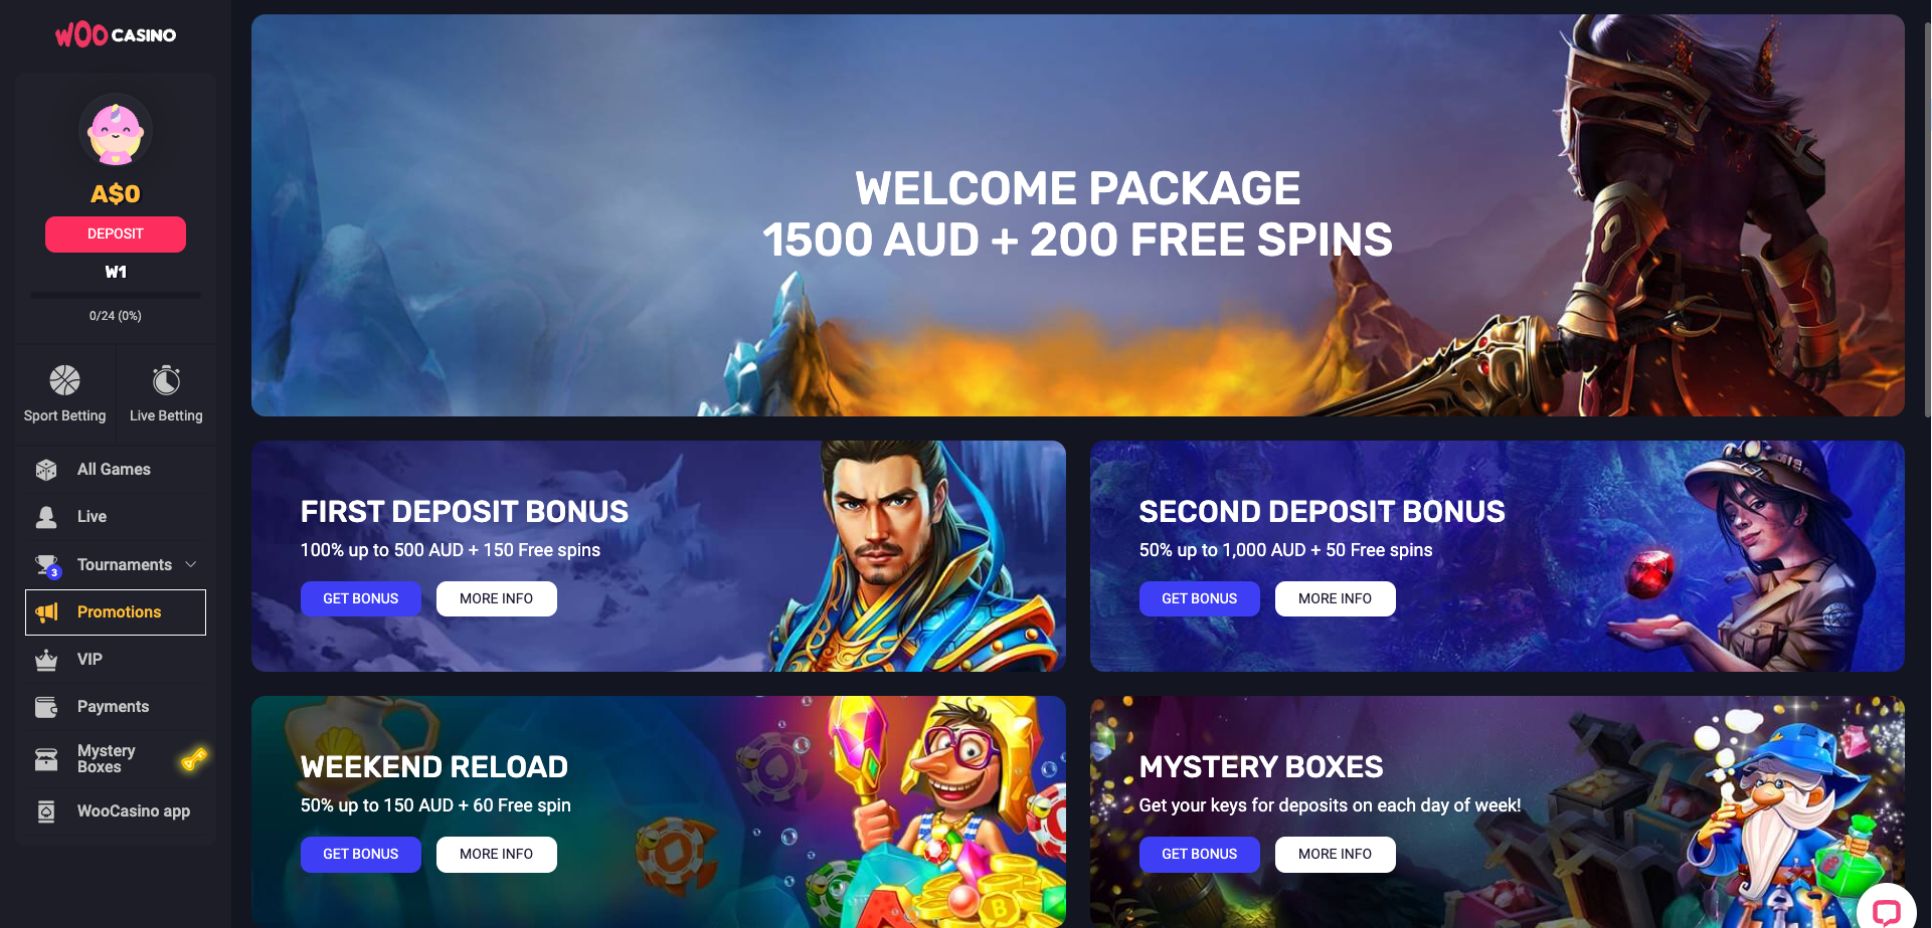 WooCasino Bonuses and Promotions Page